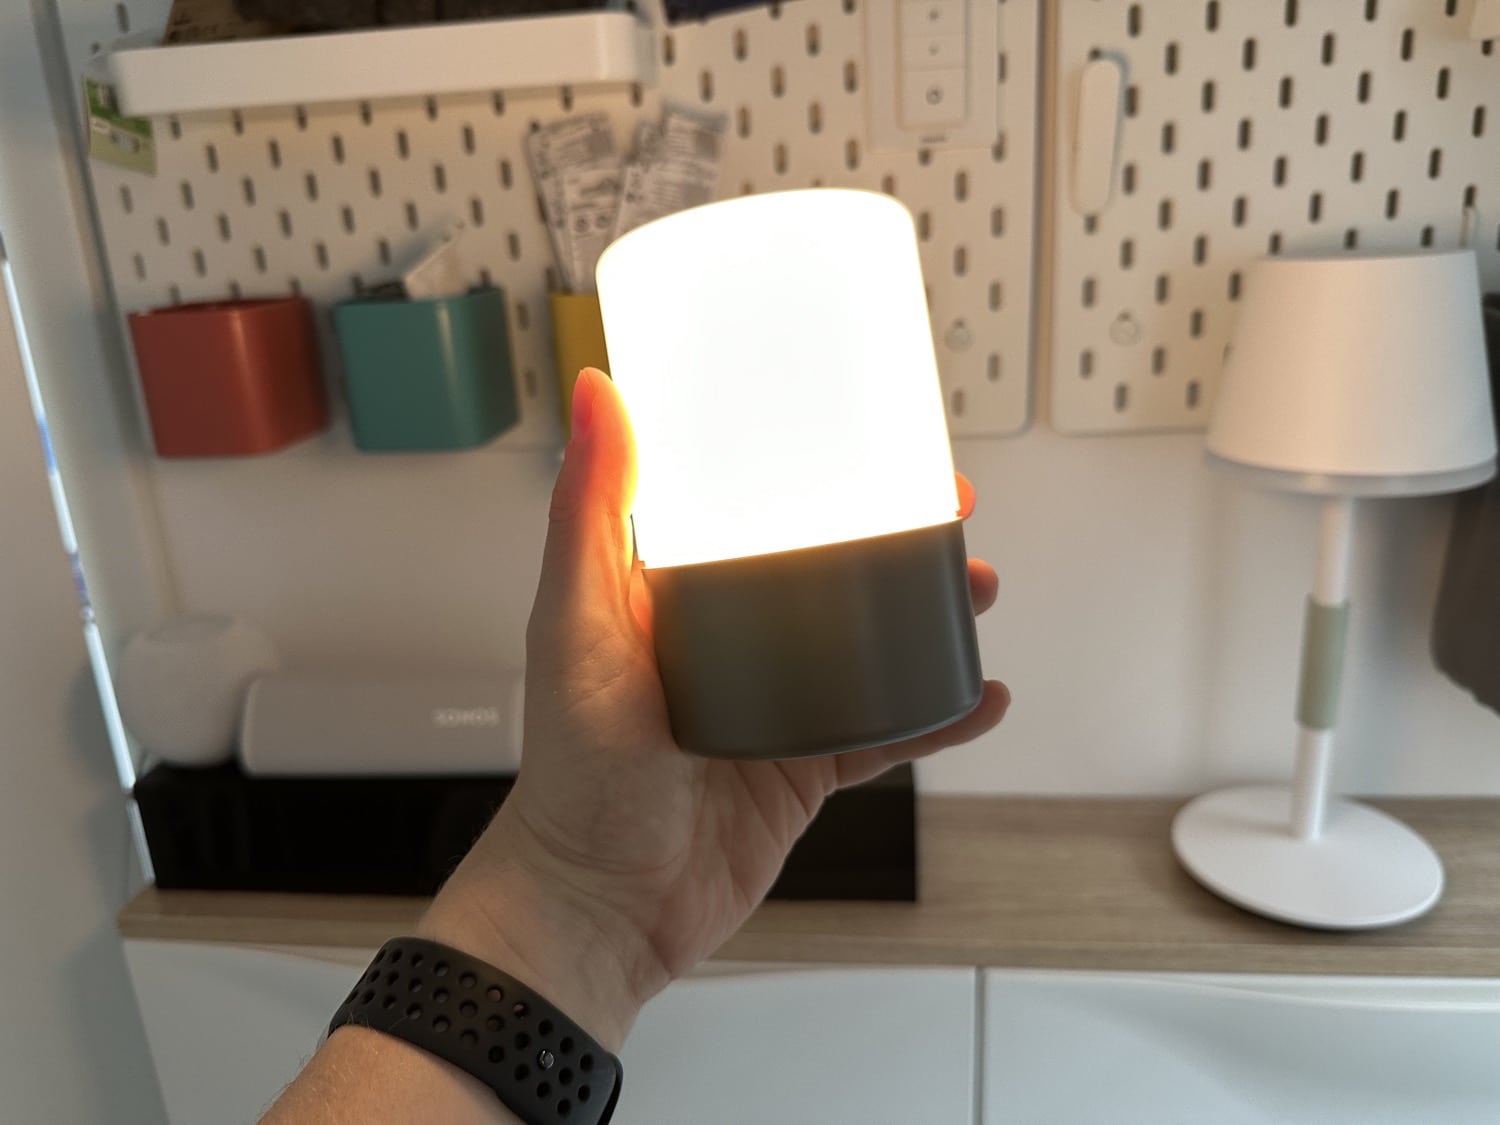 Hueblog: Phoscon Hive: Battery-powered table lamp with a great operating concept